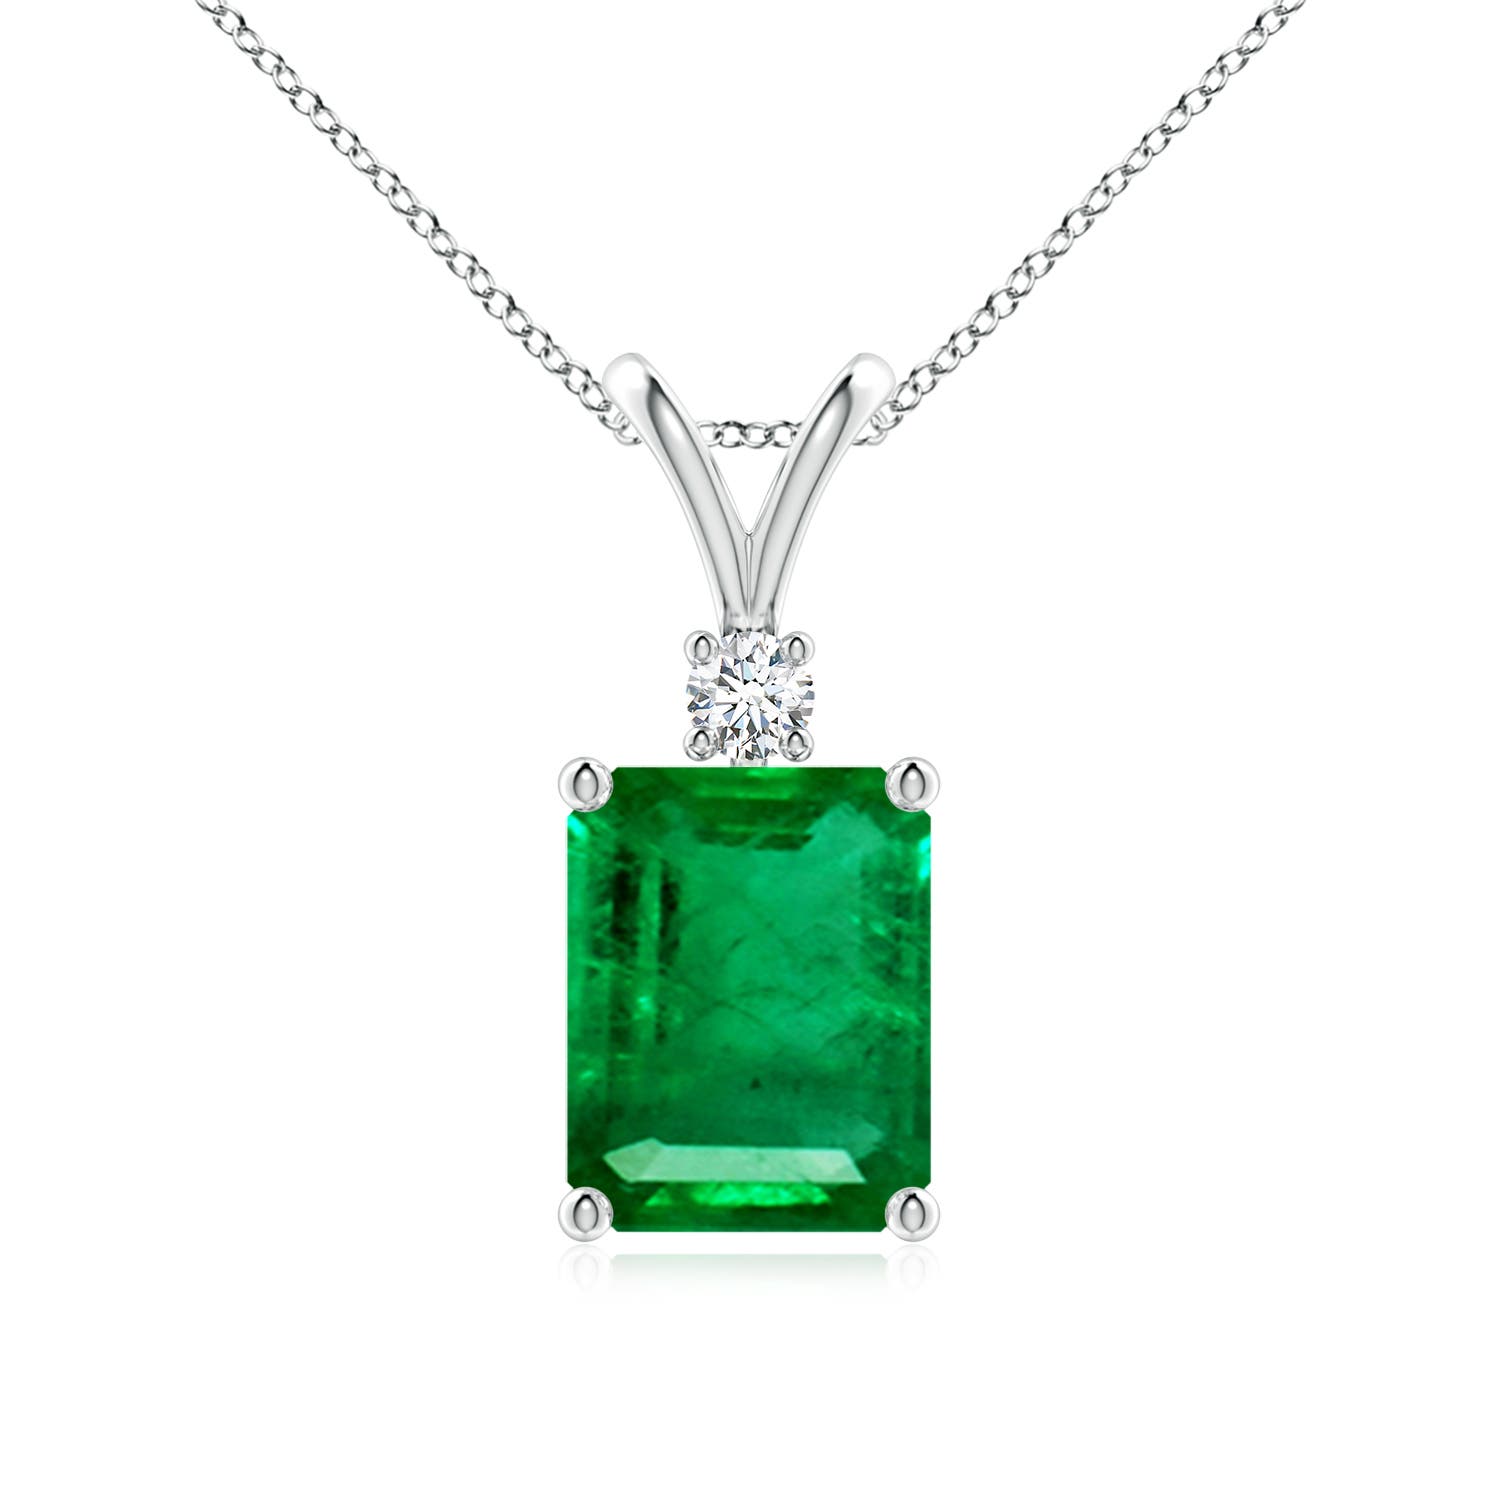 AAA - Emerald / 2.32 CT / 14 KT White Gold